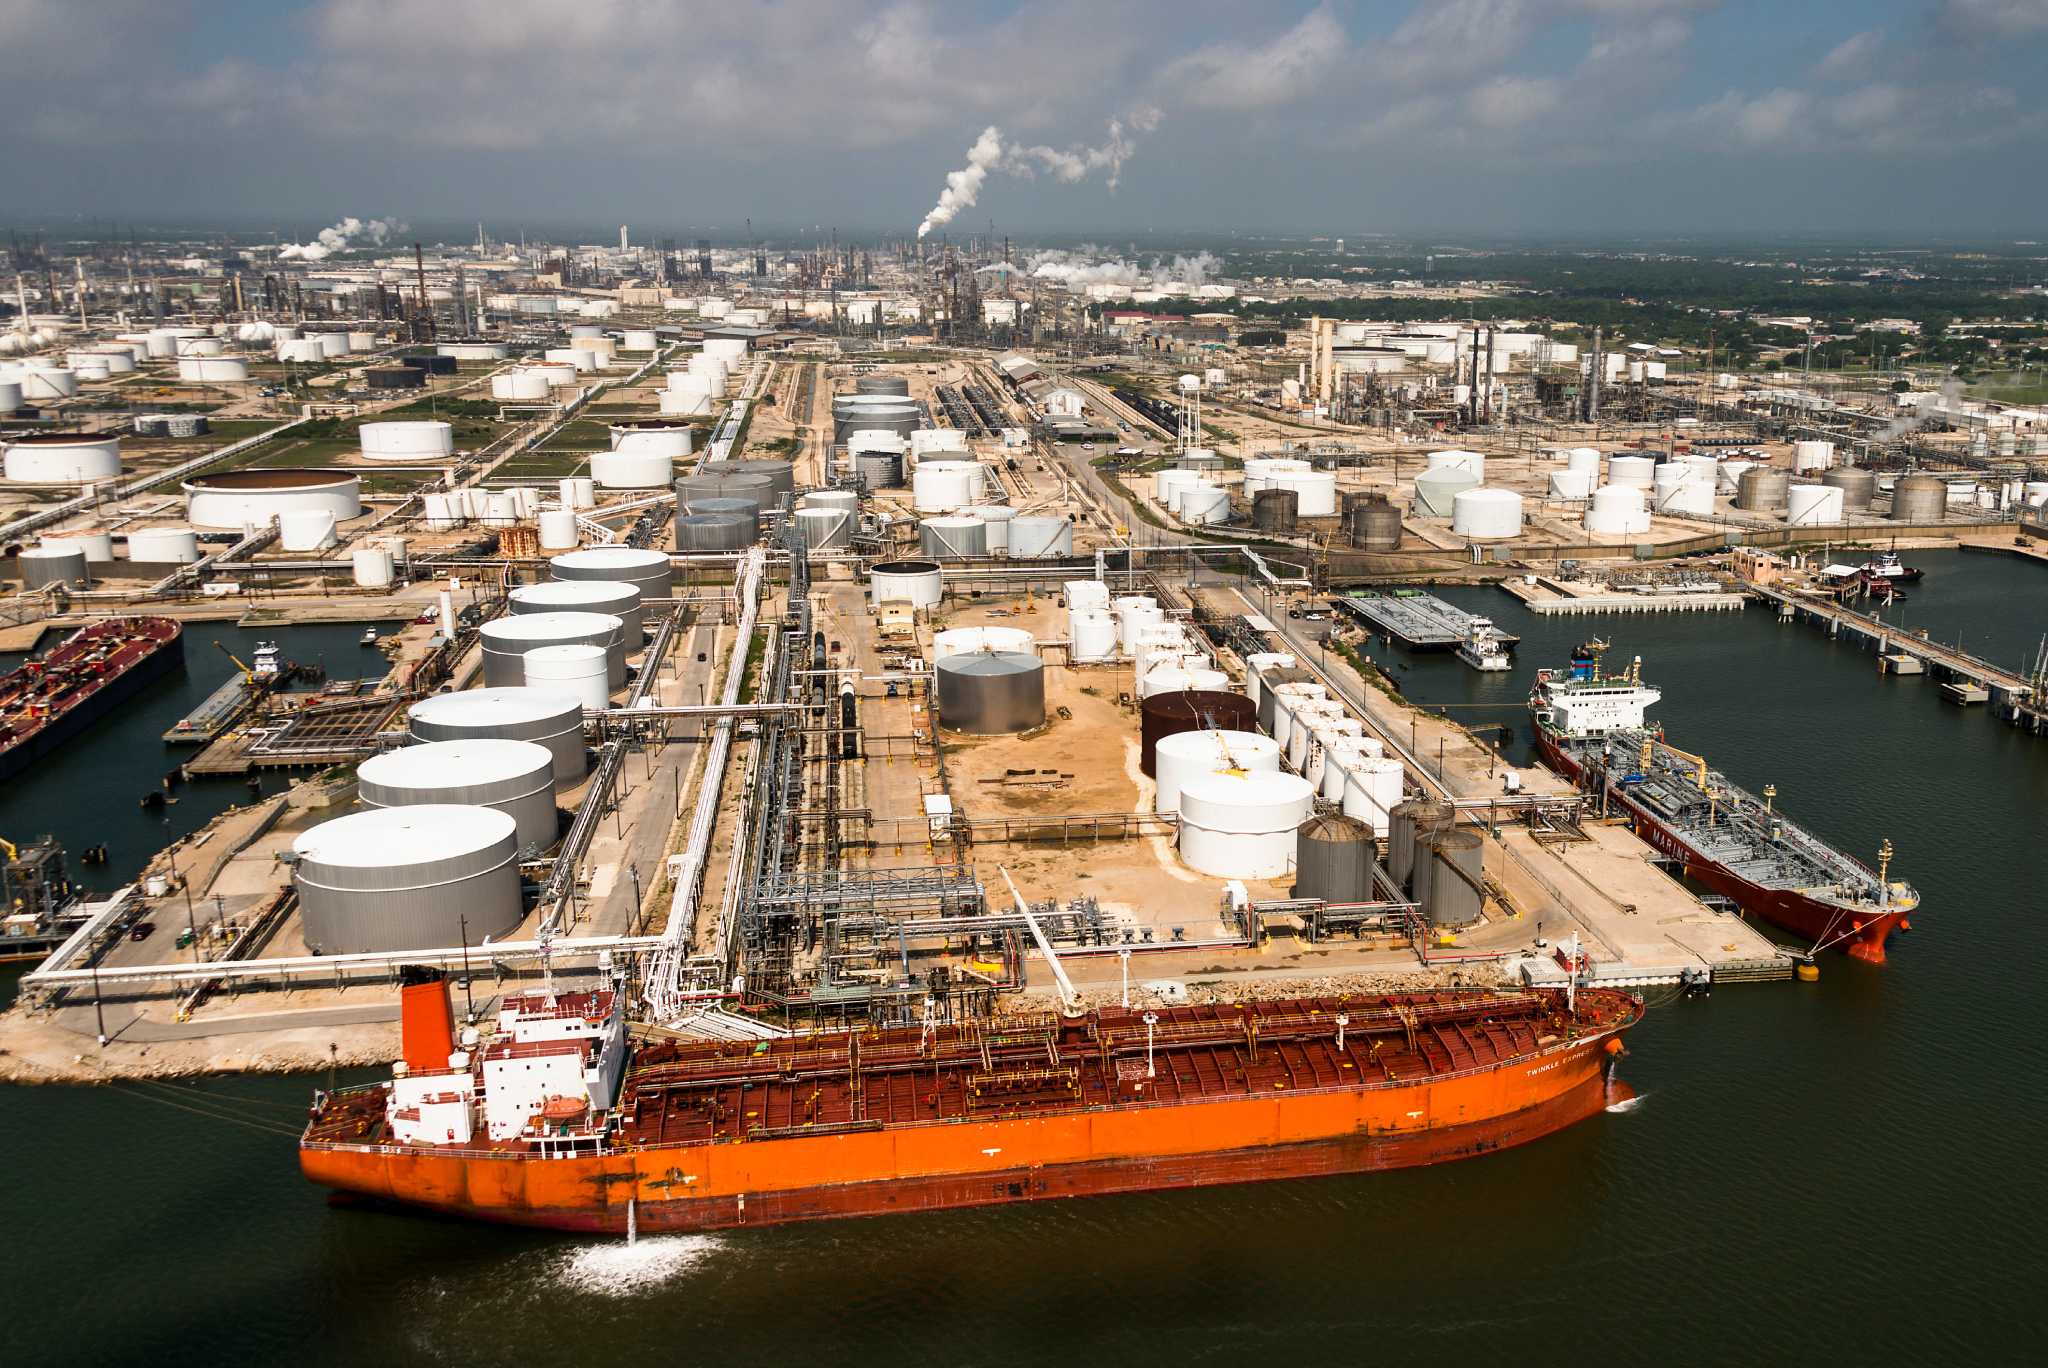 Texas City in the running for gigantic methanol plant